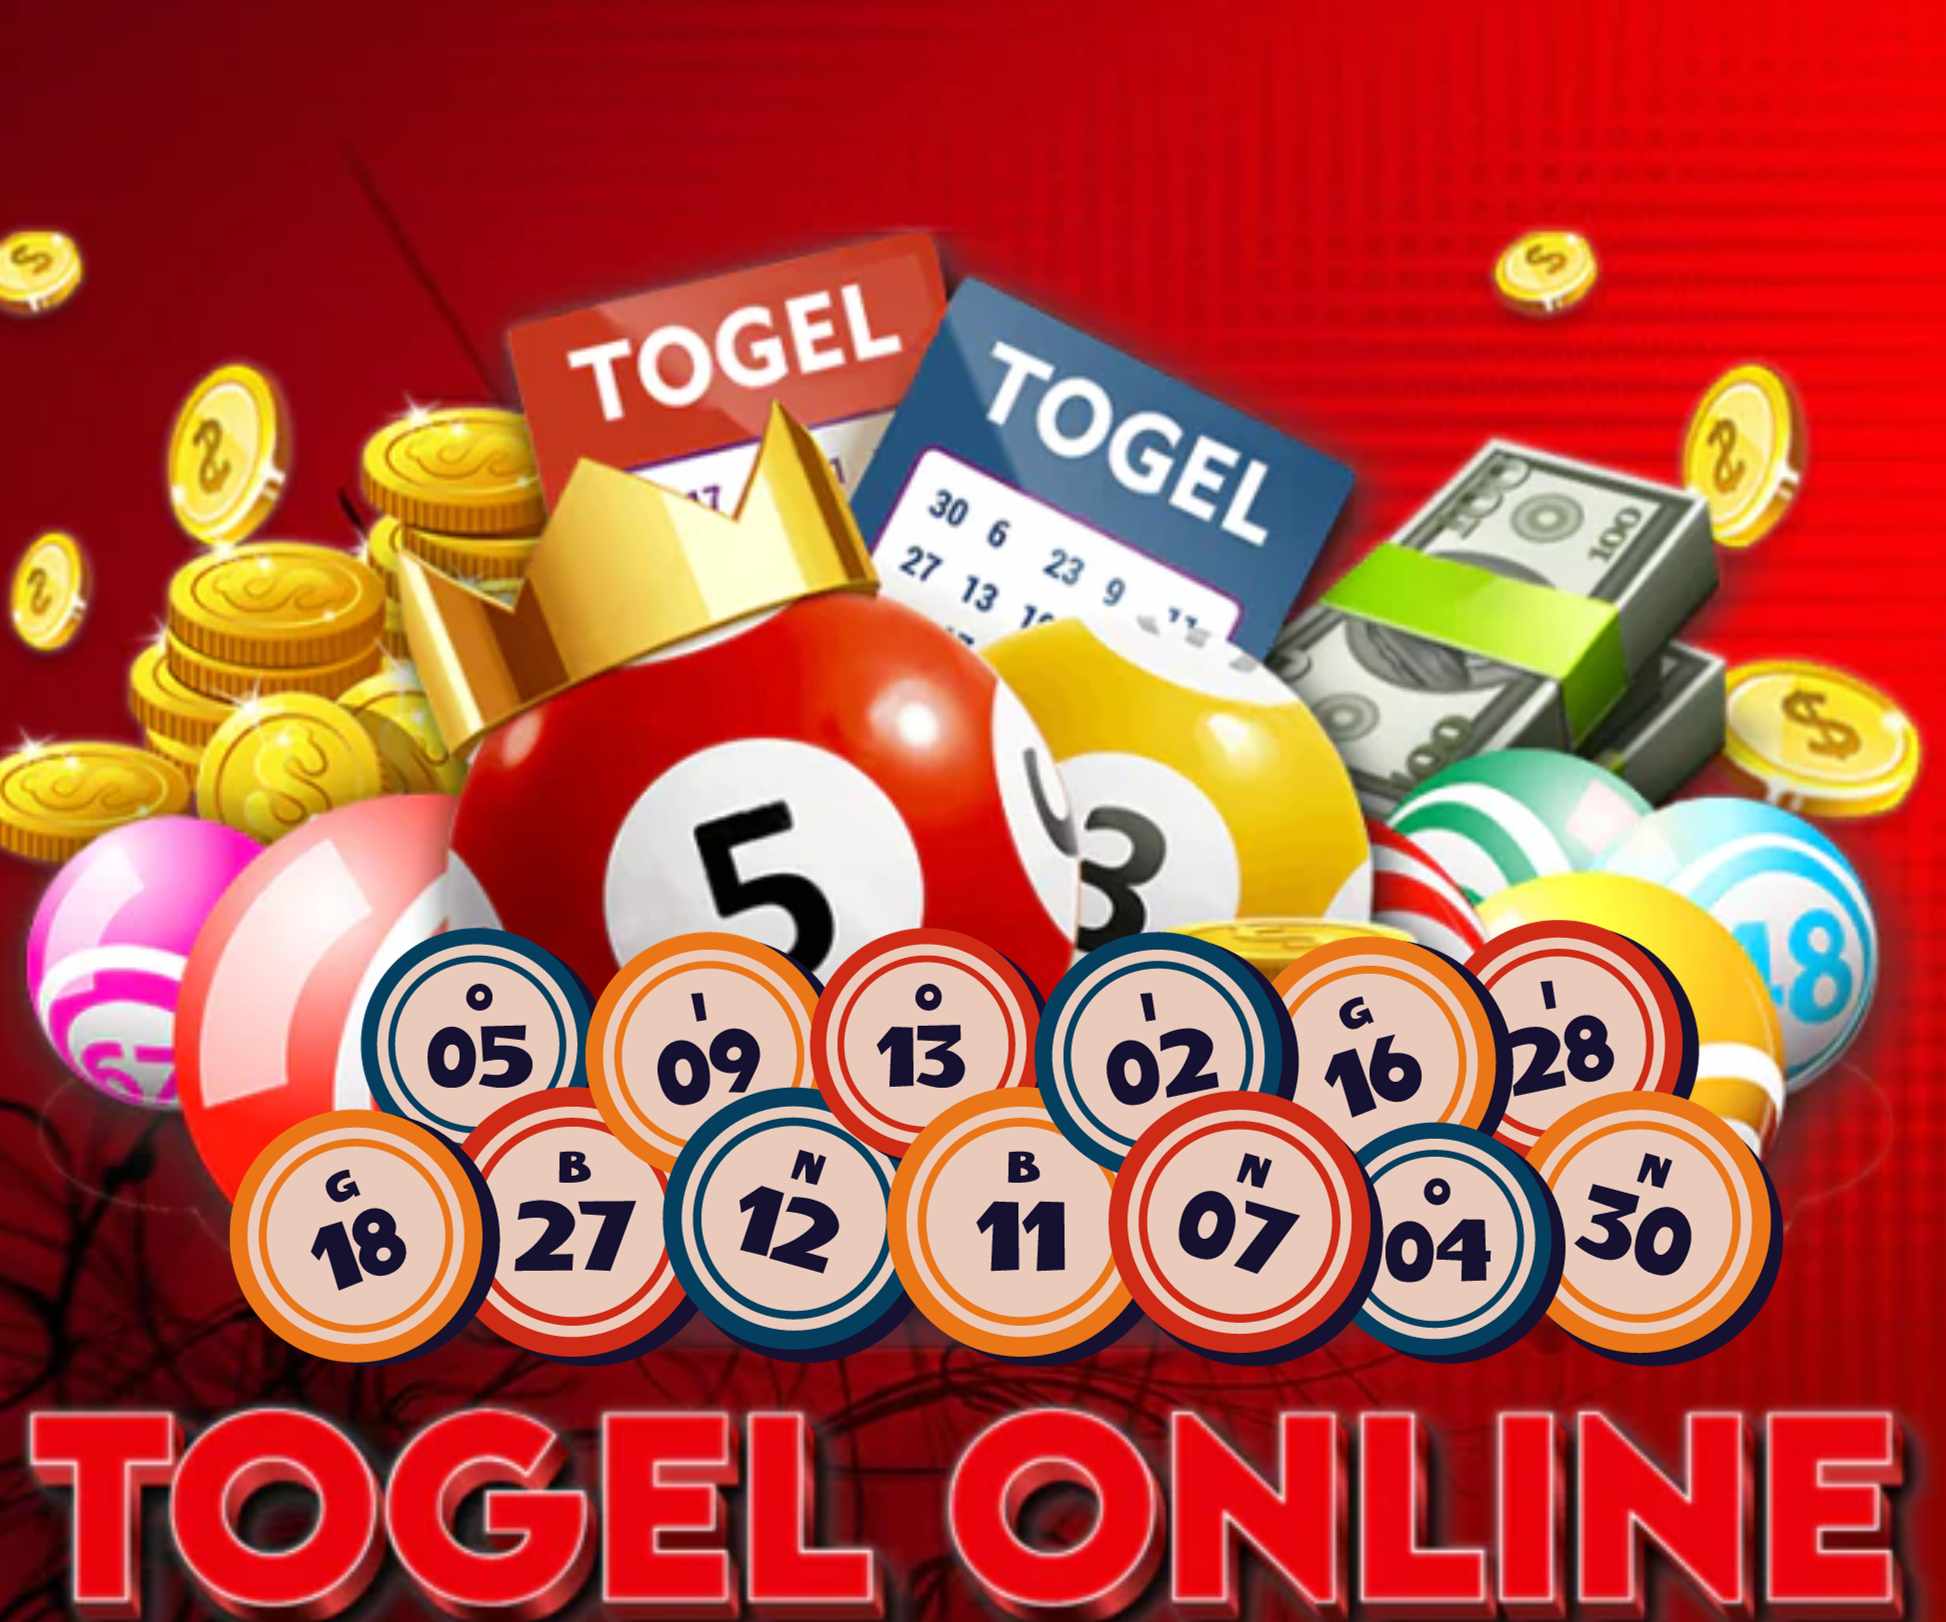 Togel is a popular game that tests luck